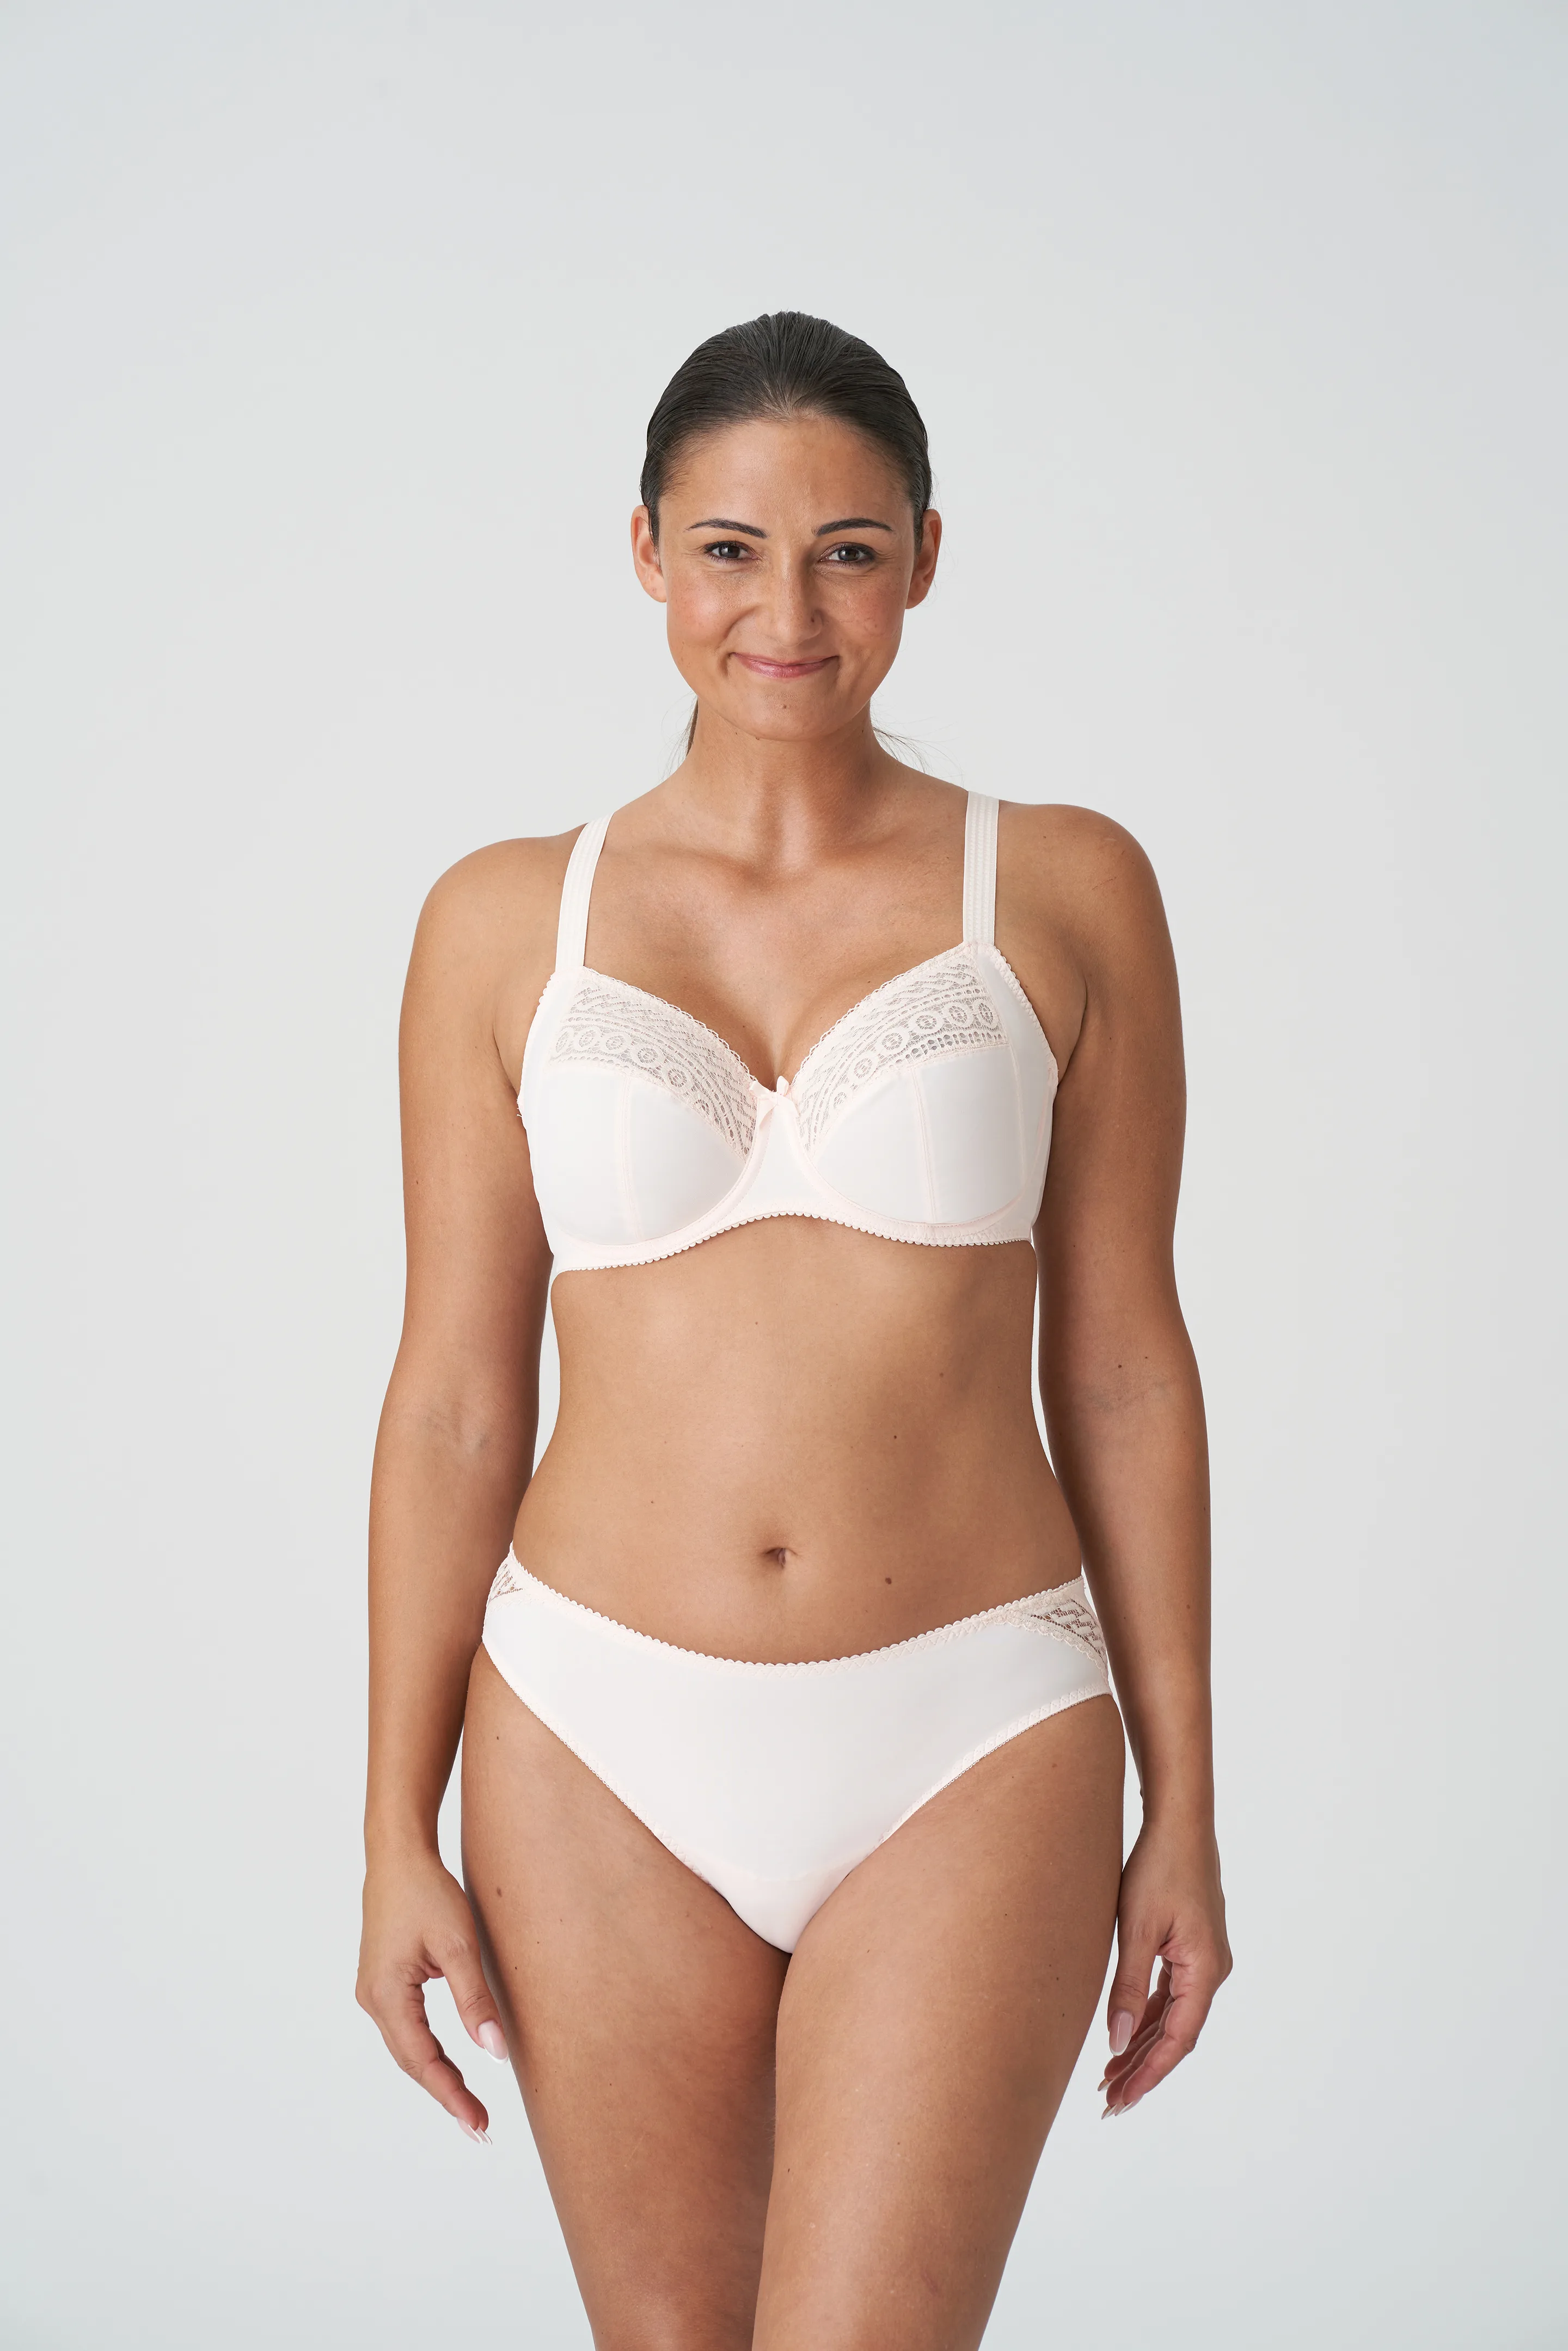 New in from PrimaDonna Lingerie, Montara, available in sizes 34 C